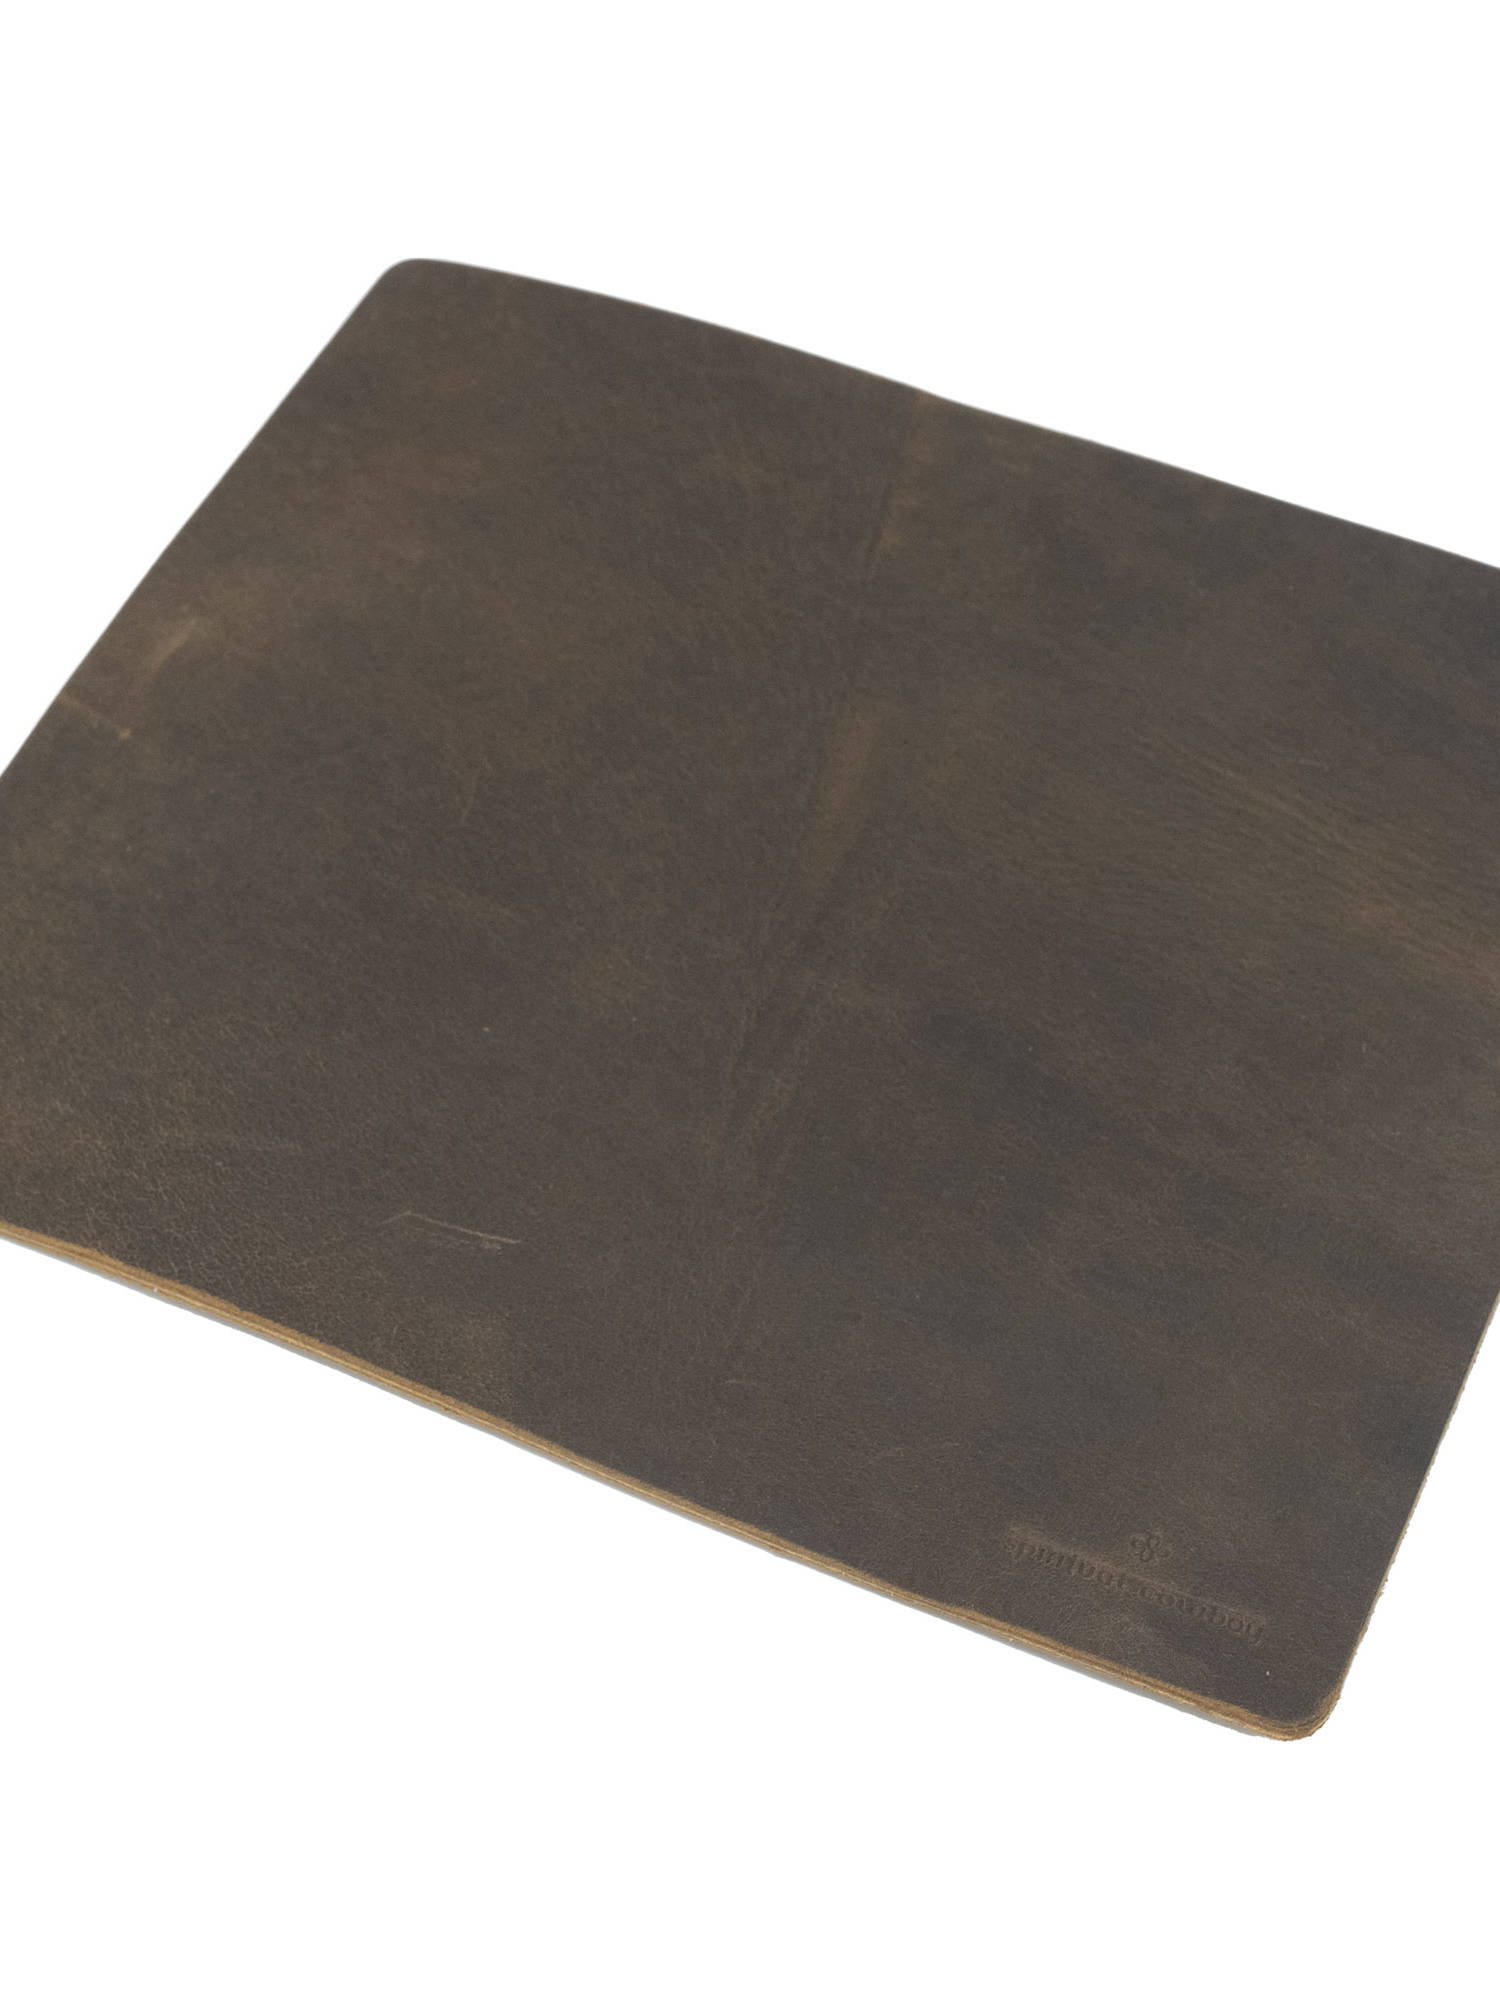 Mouse Pad No 714 Crazy Horse Leather Brown Angled